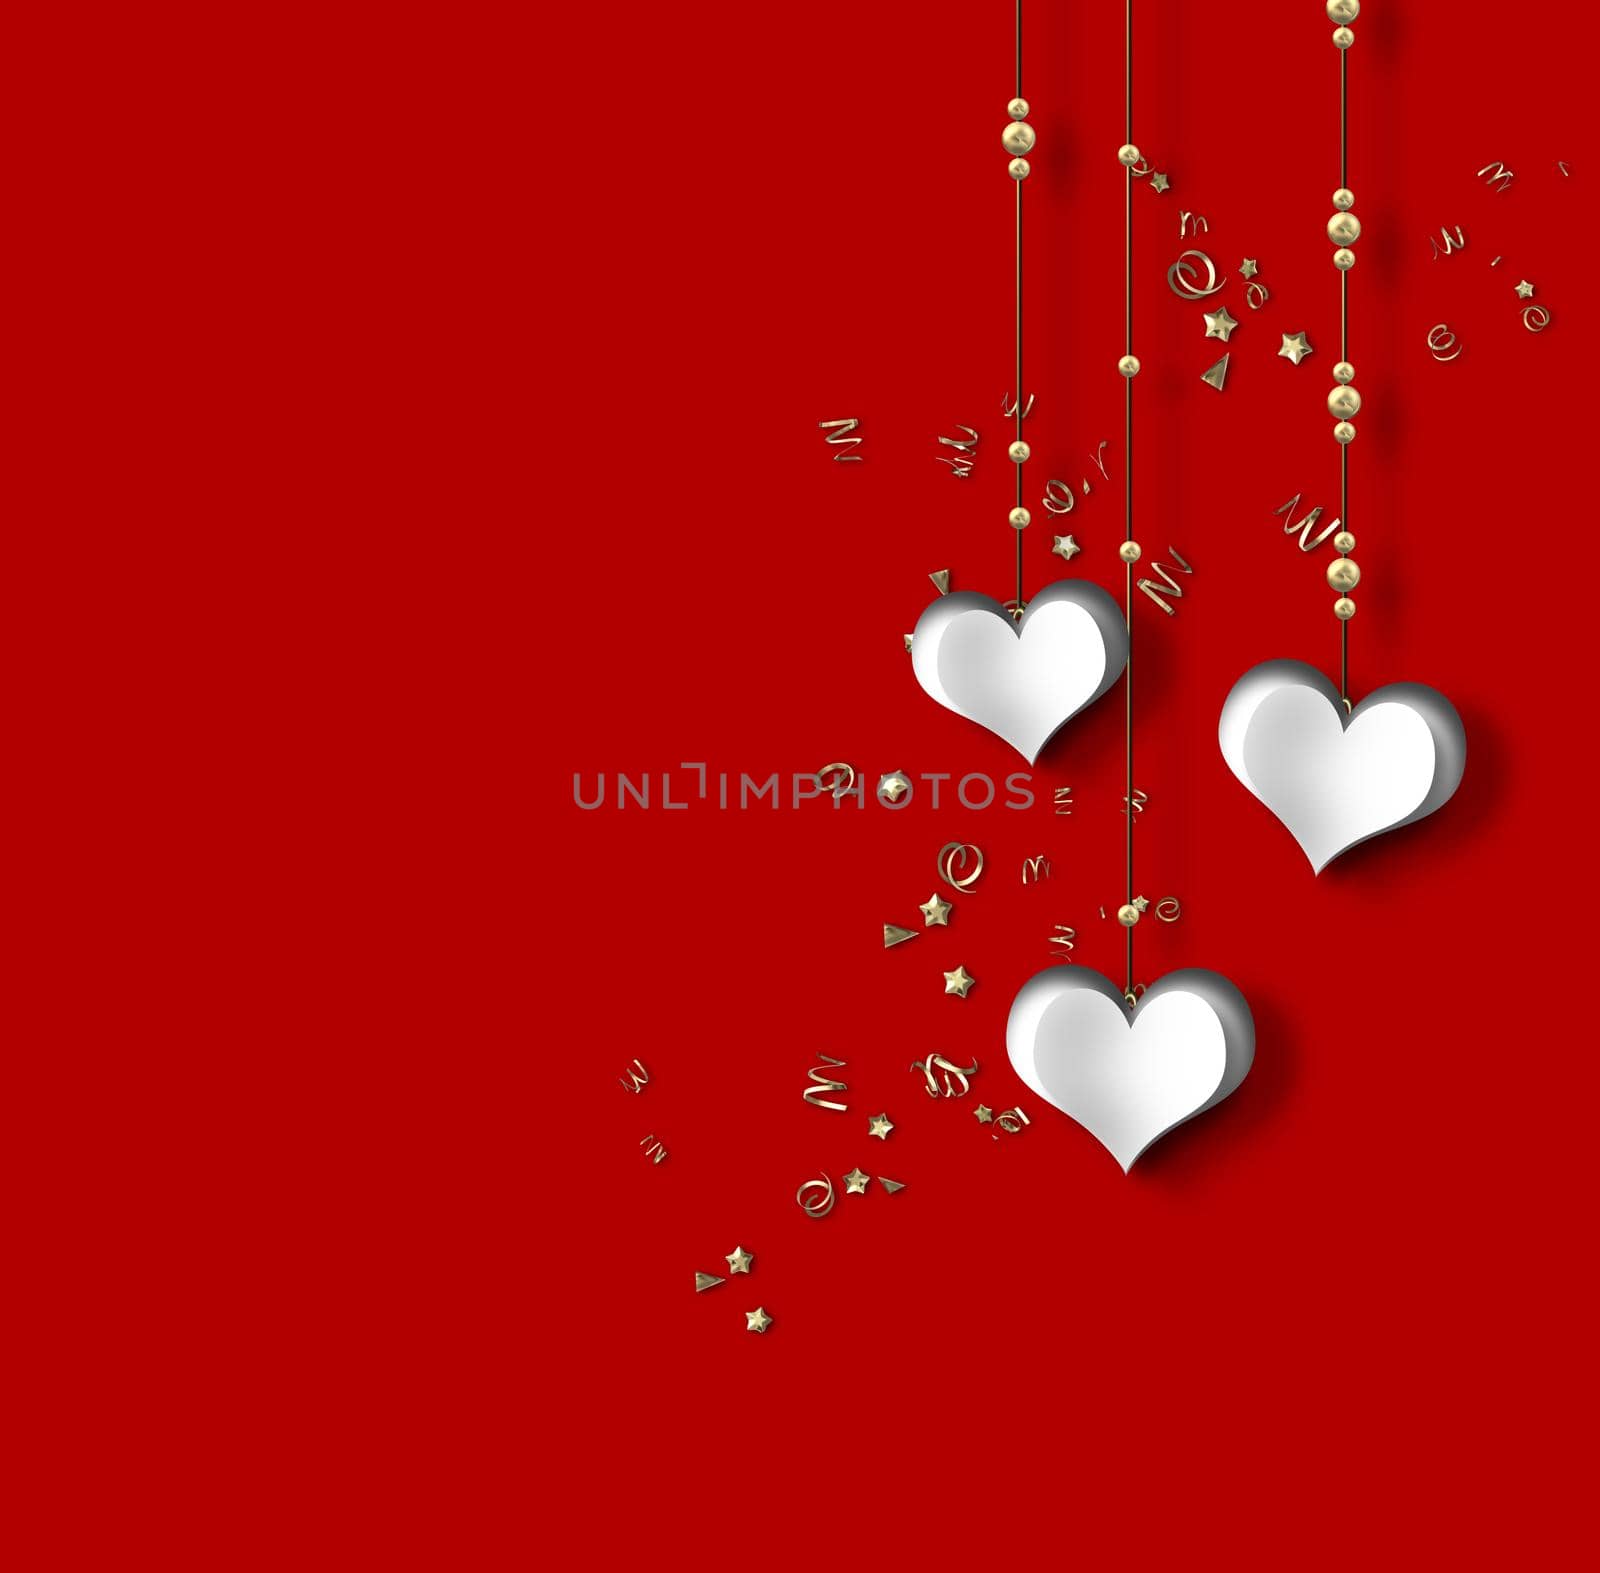 Love card with hanging paper hearts on red background, gold confetti. 3D illustration